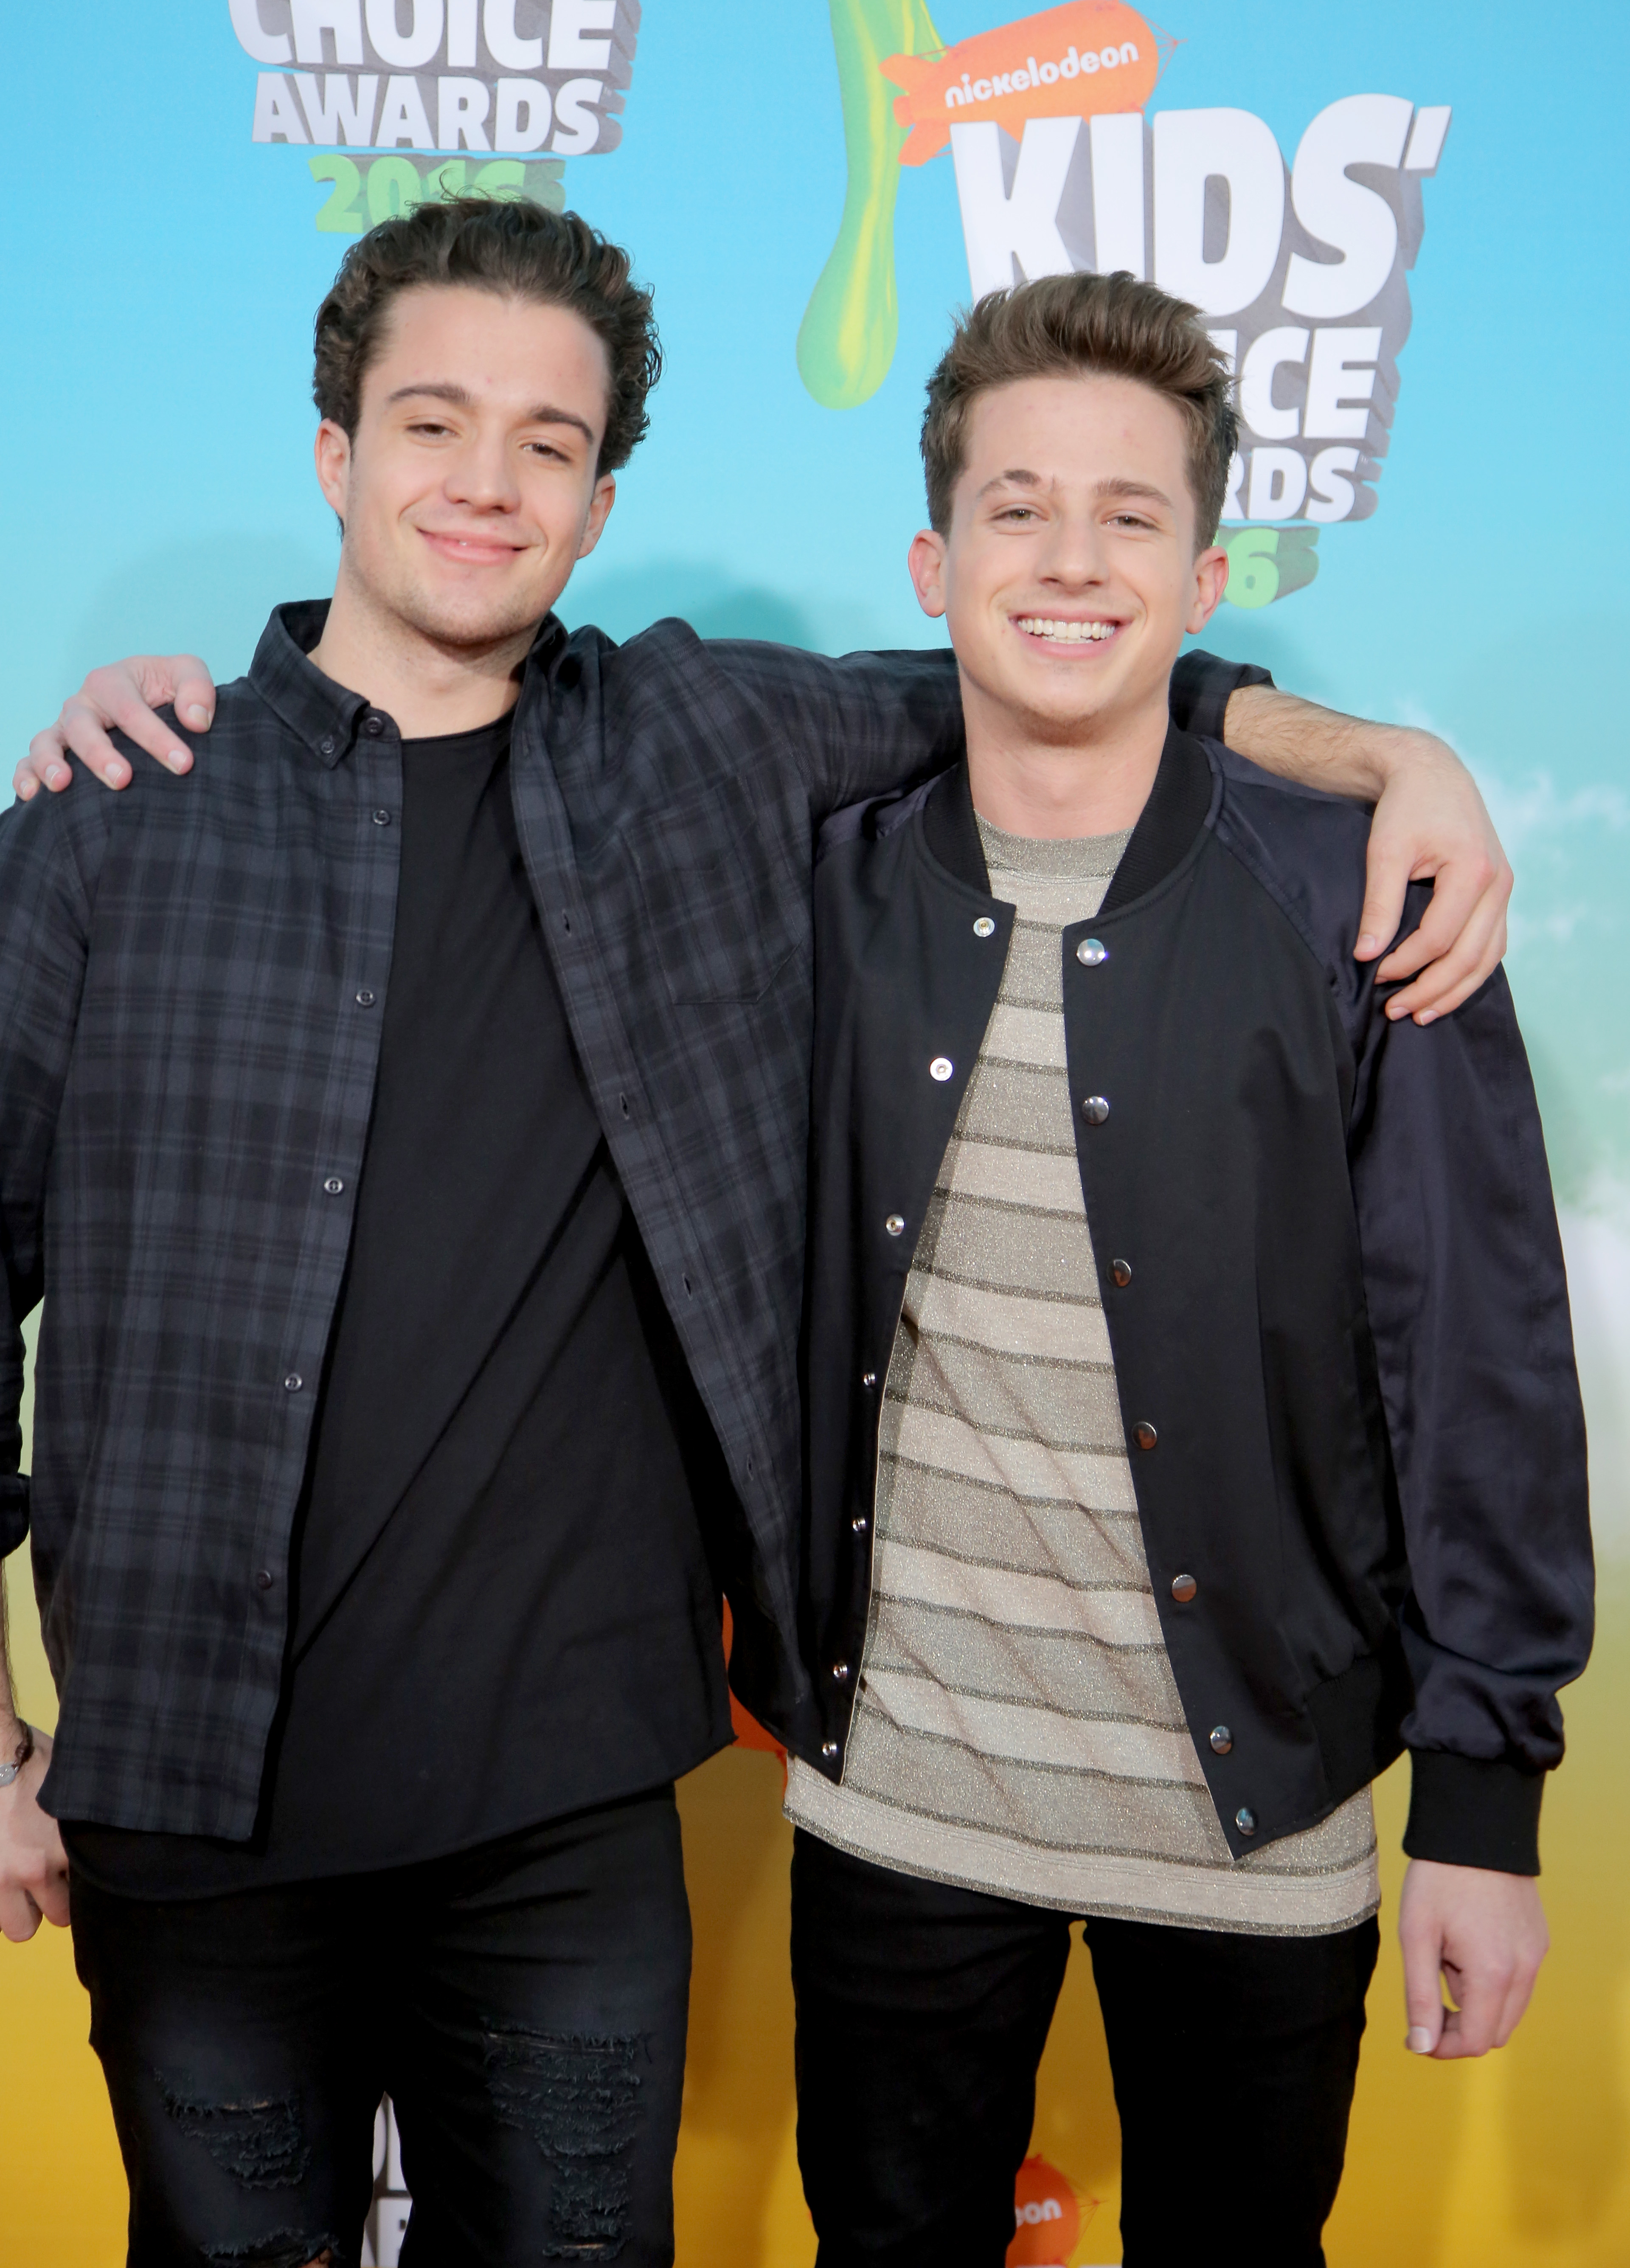 Stephen and Charlie Puth